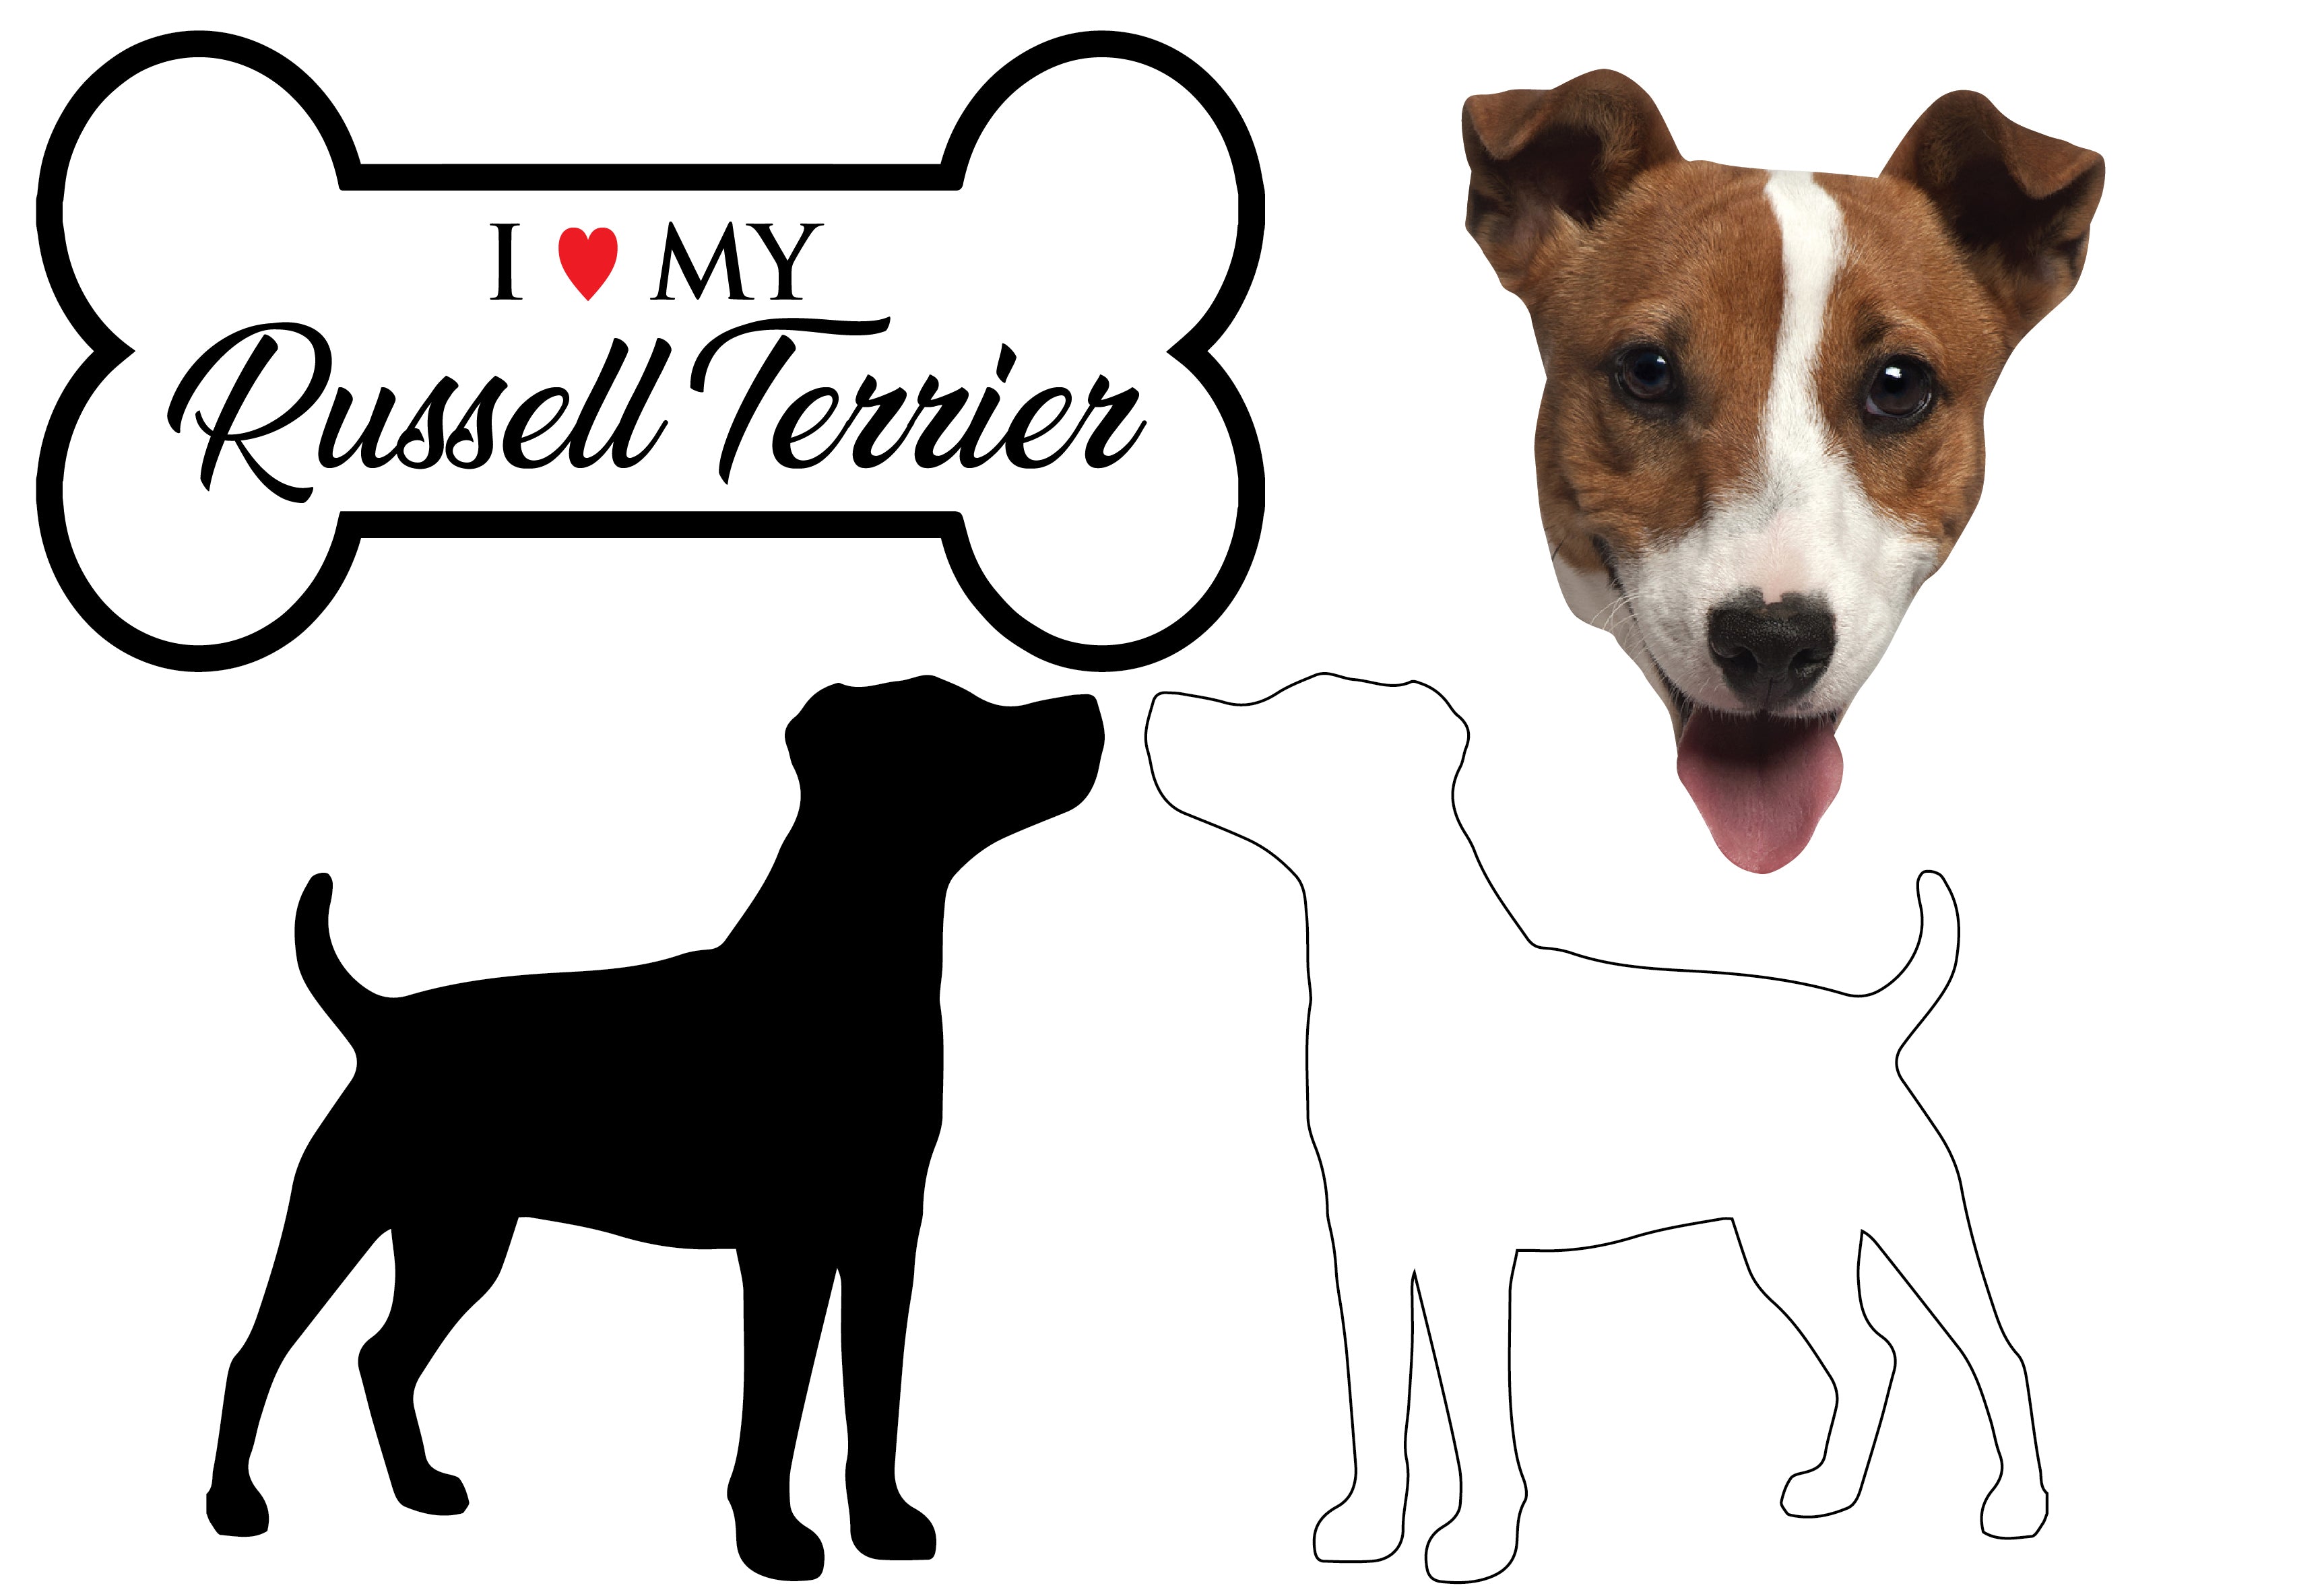 Russell Terrier - Dog Breed Decals (Set of 16) - Sizes in Description